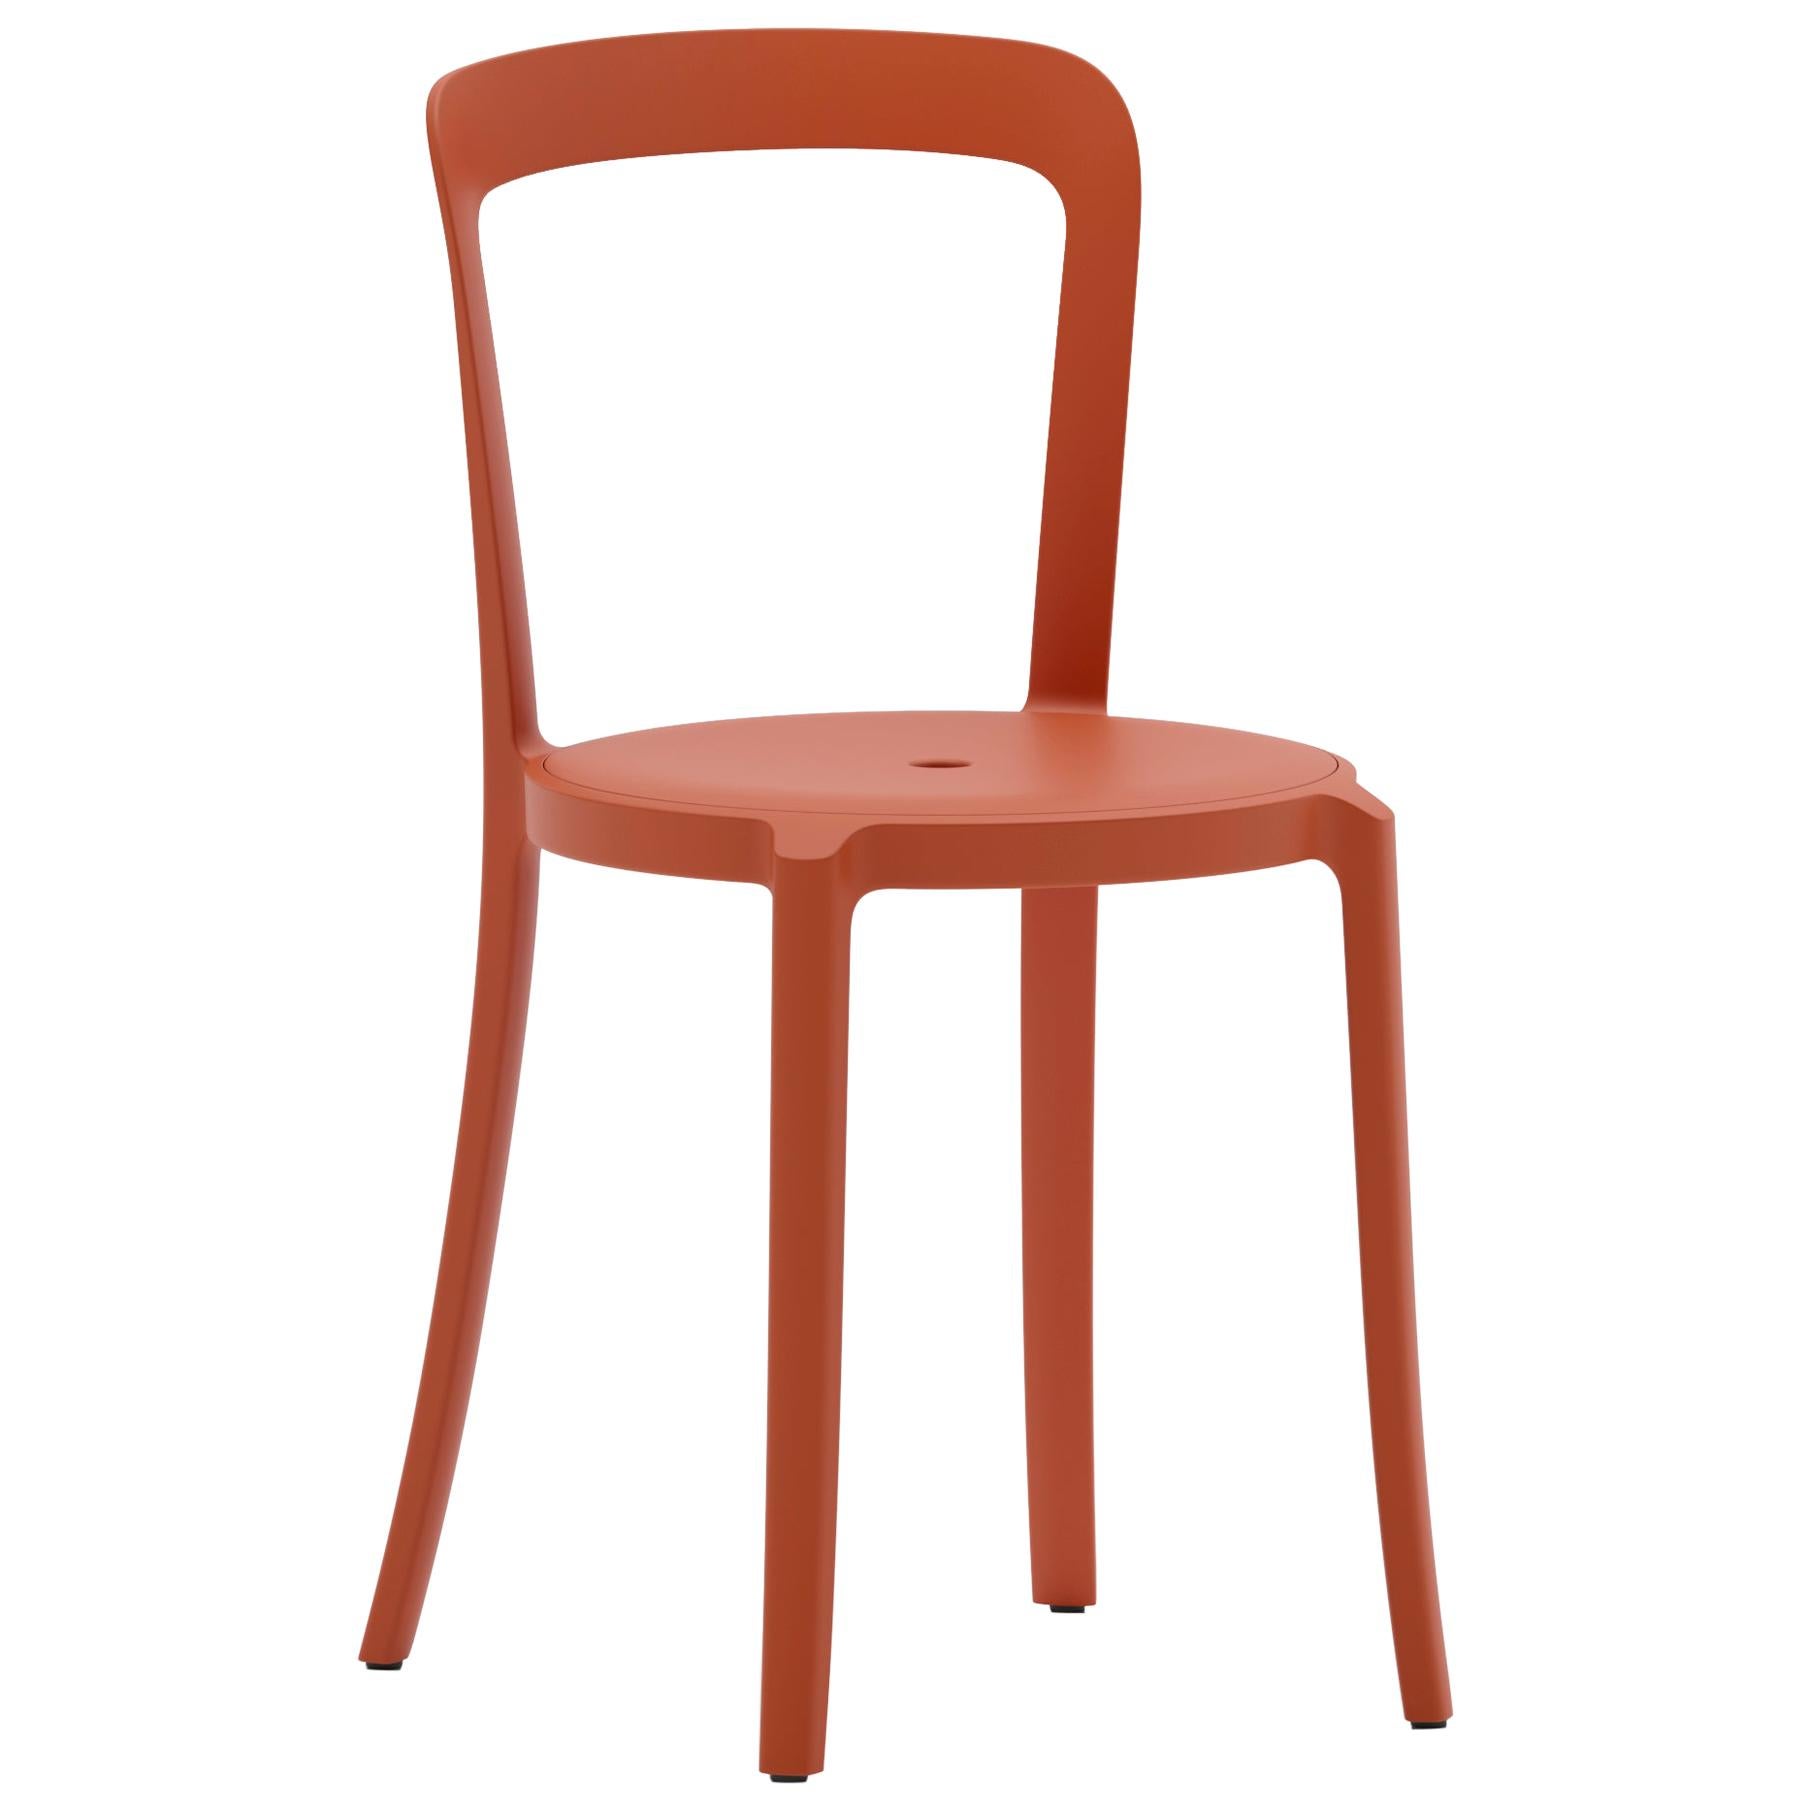 Emeco On & On Stacking Chair in Orange Plastic by Barber & Osgerby For Sale